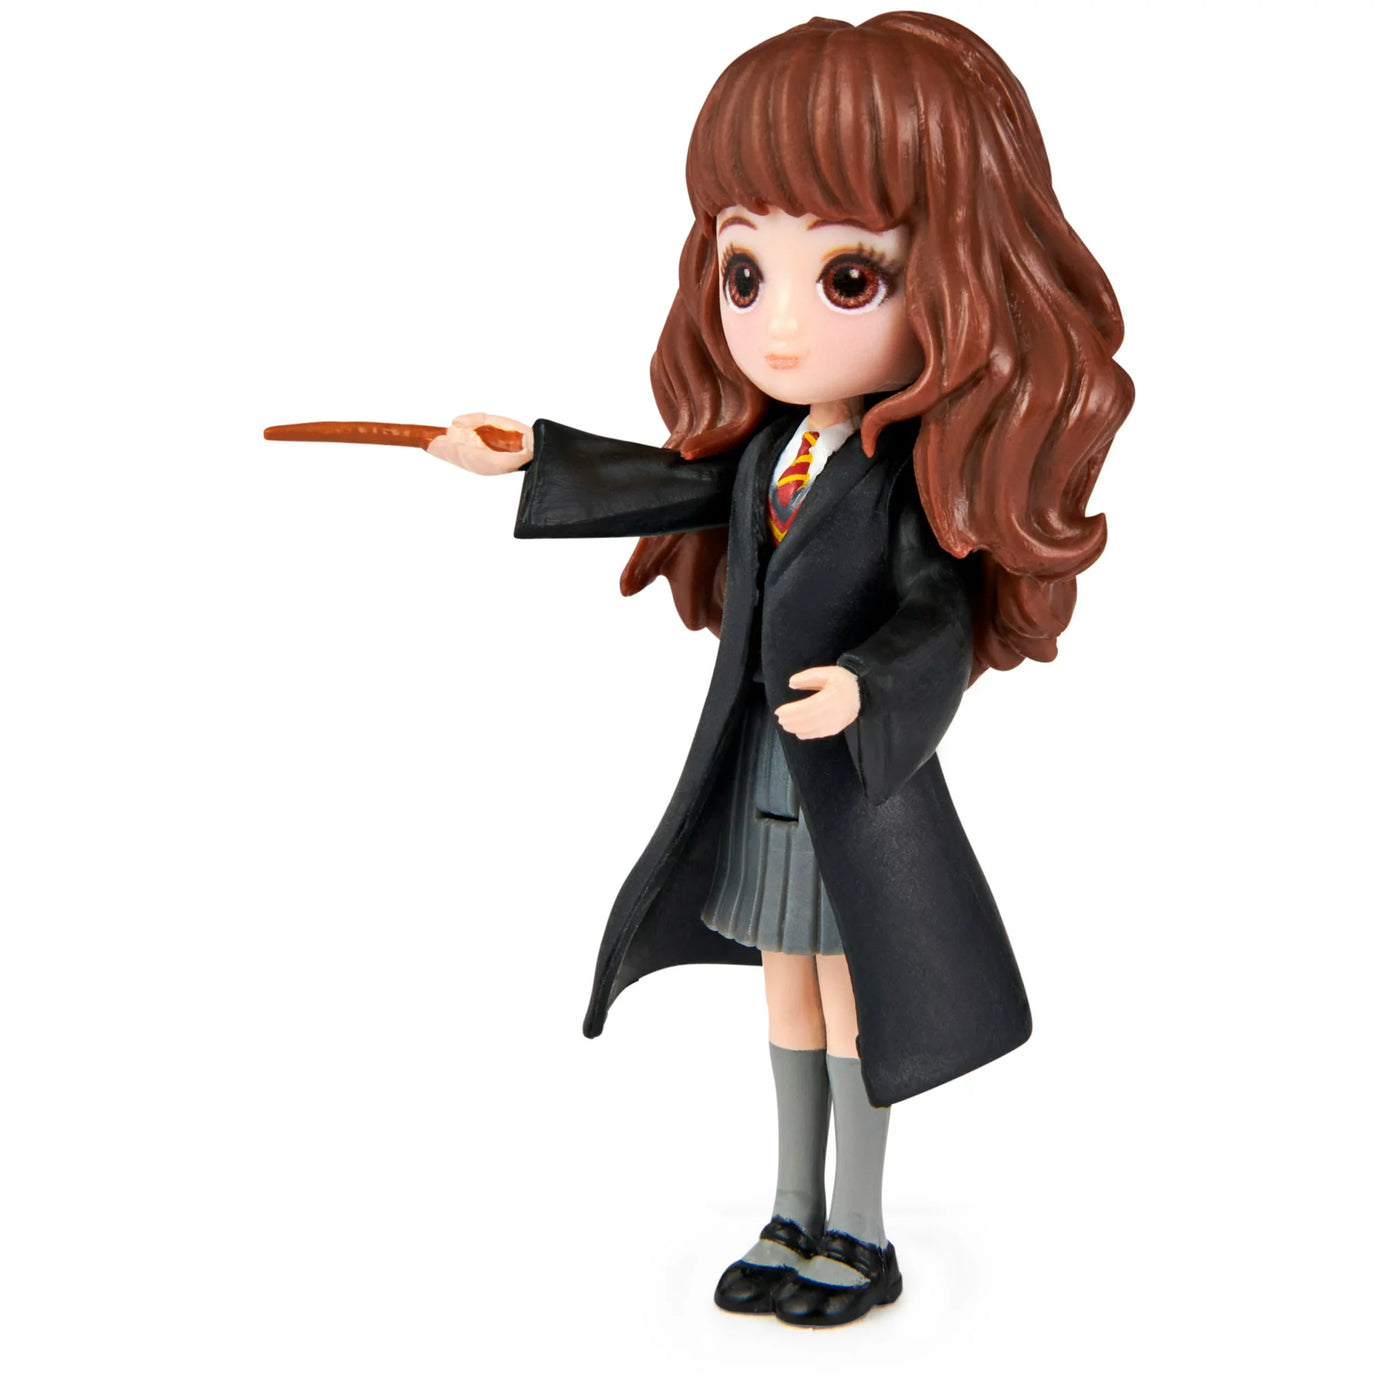 Wizarding World Harry Potter, Magical Minis Care of Magical